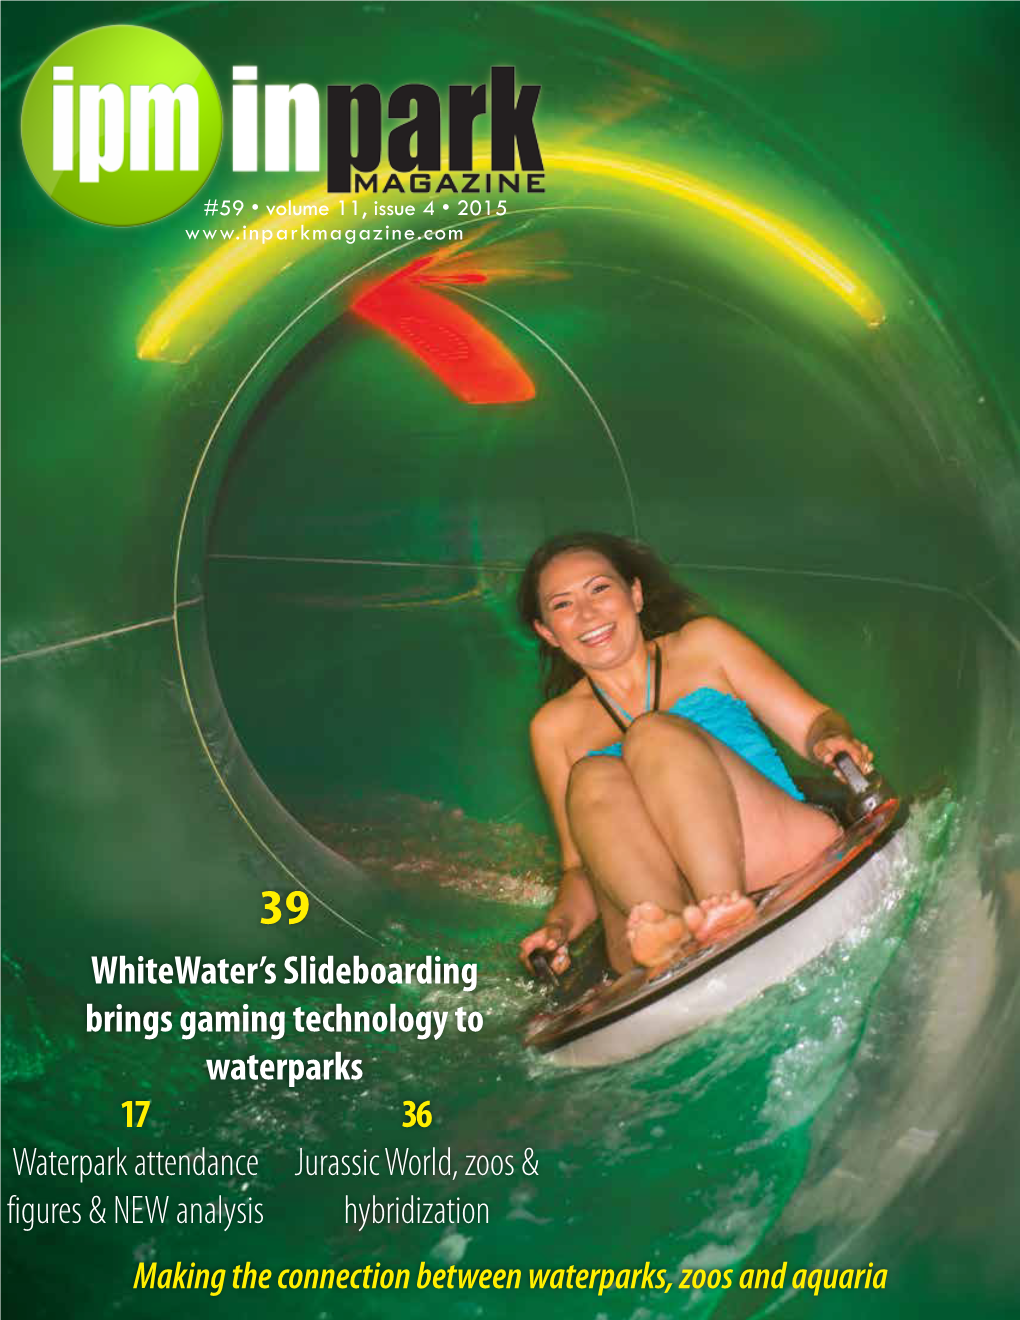 Whitewater's Slideboarding Brings Gaming Technology to Waterparks